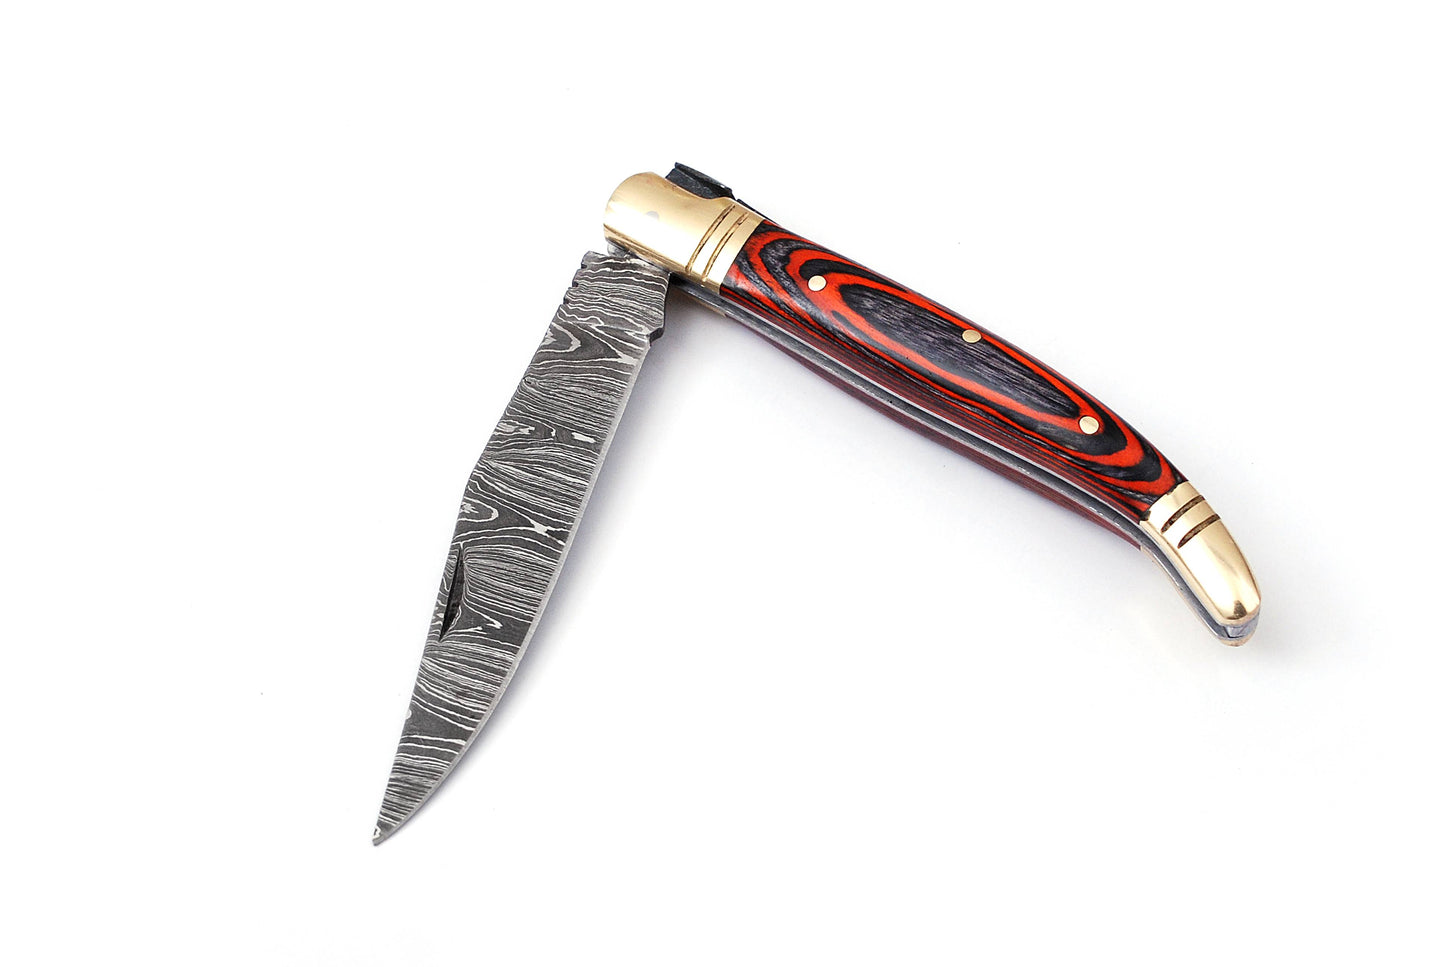 Folding Damascus steel knife, 8.5" Long with 4" hand forged custom twist pattern Blade. Orange & Black wood scale with brass bolster, Cow hide leather sheath included